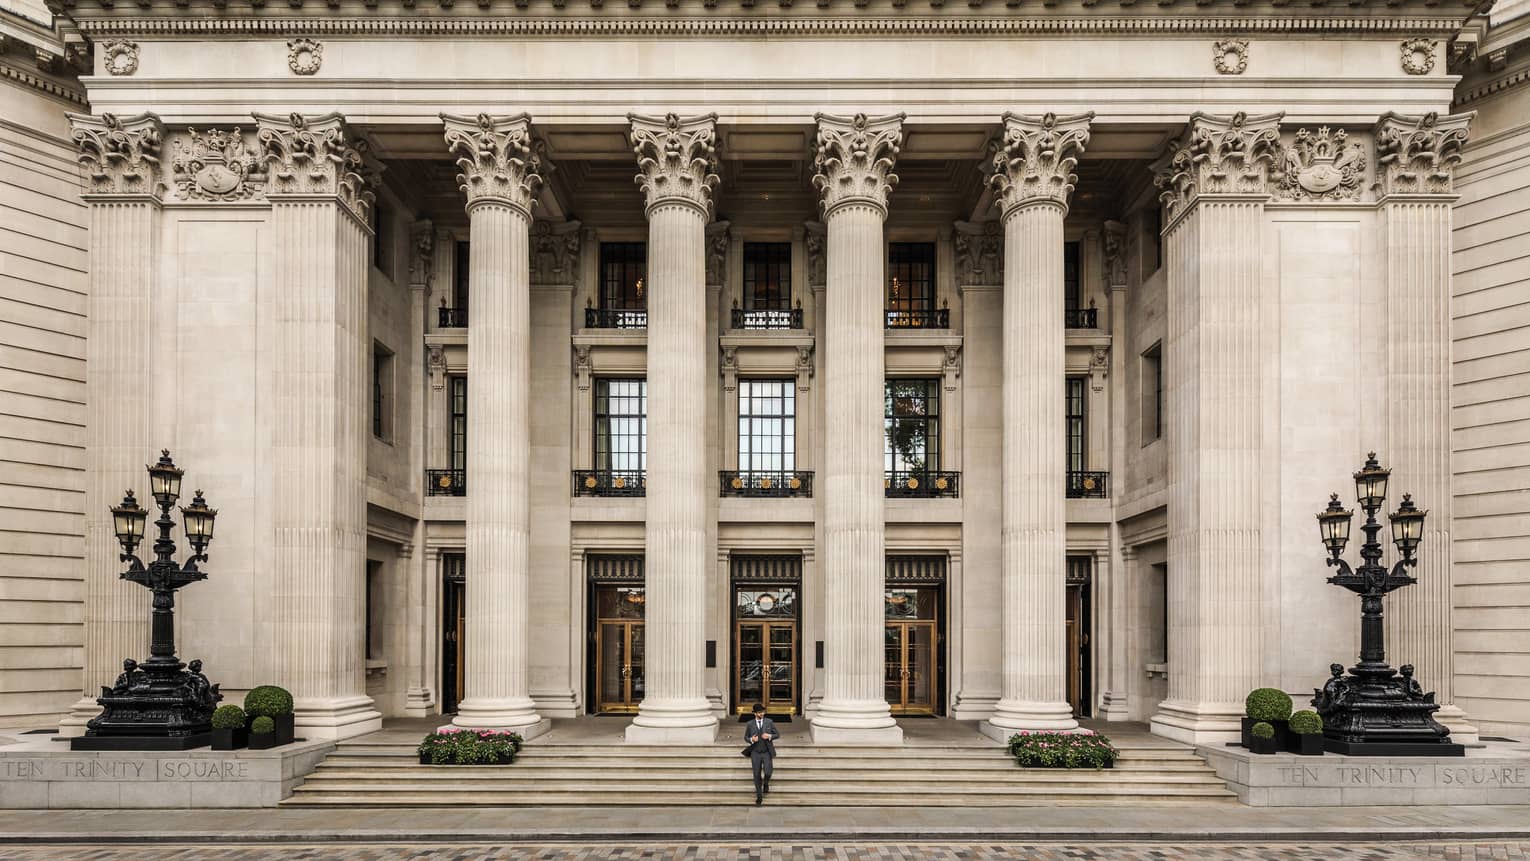 Ten Trinity Square front entrance with tall white stone pillars over steps